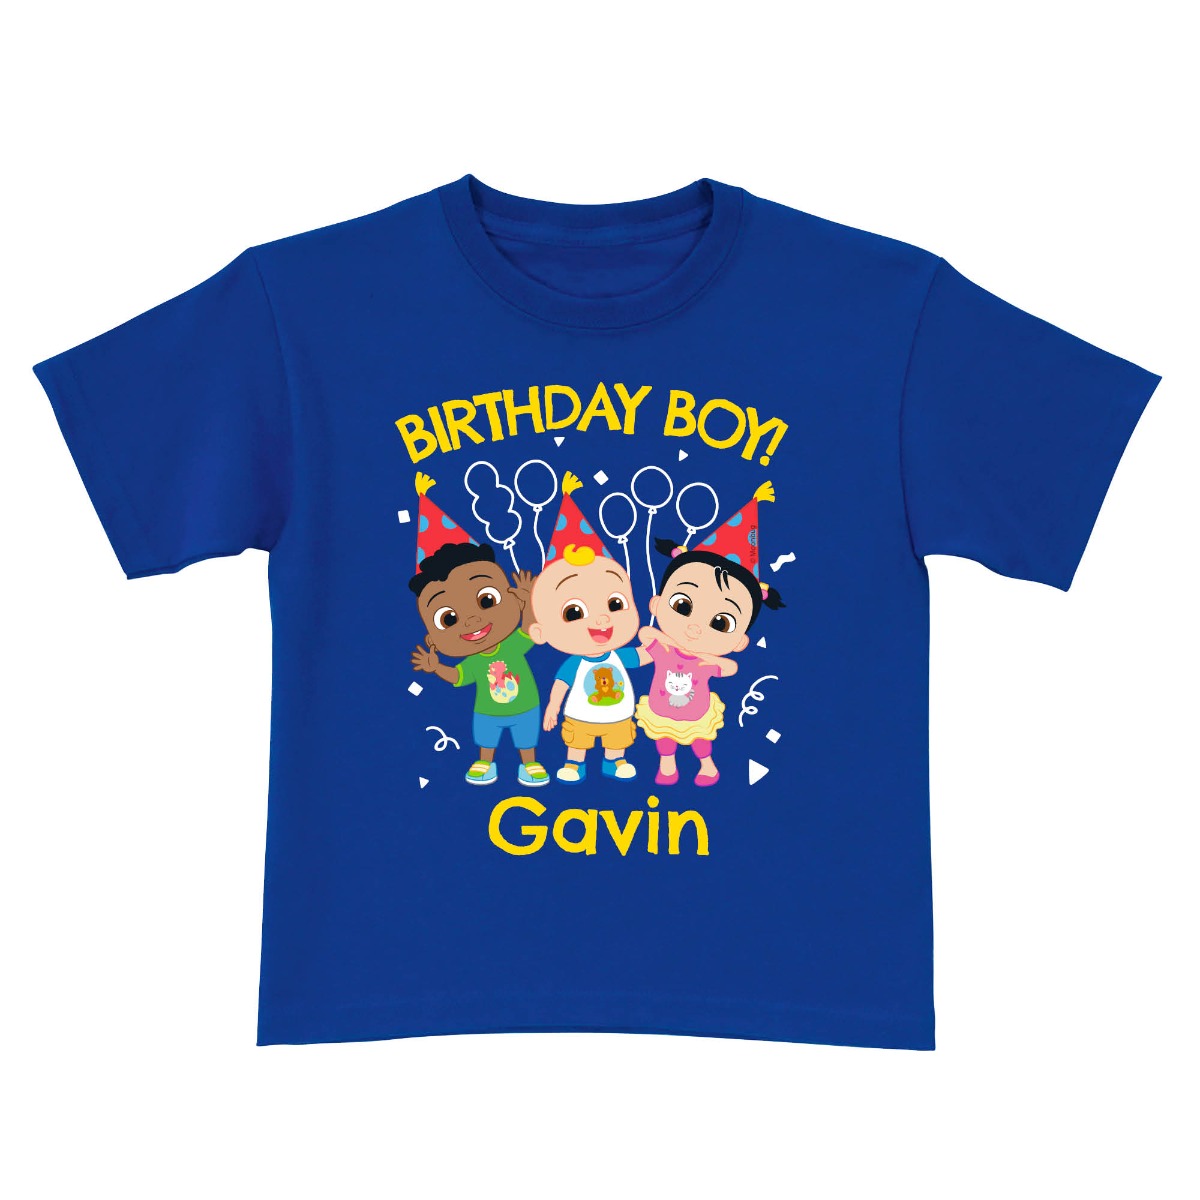 cocomelon birthday boy t-shirt with name 